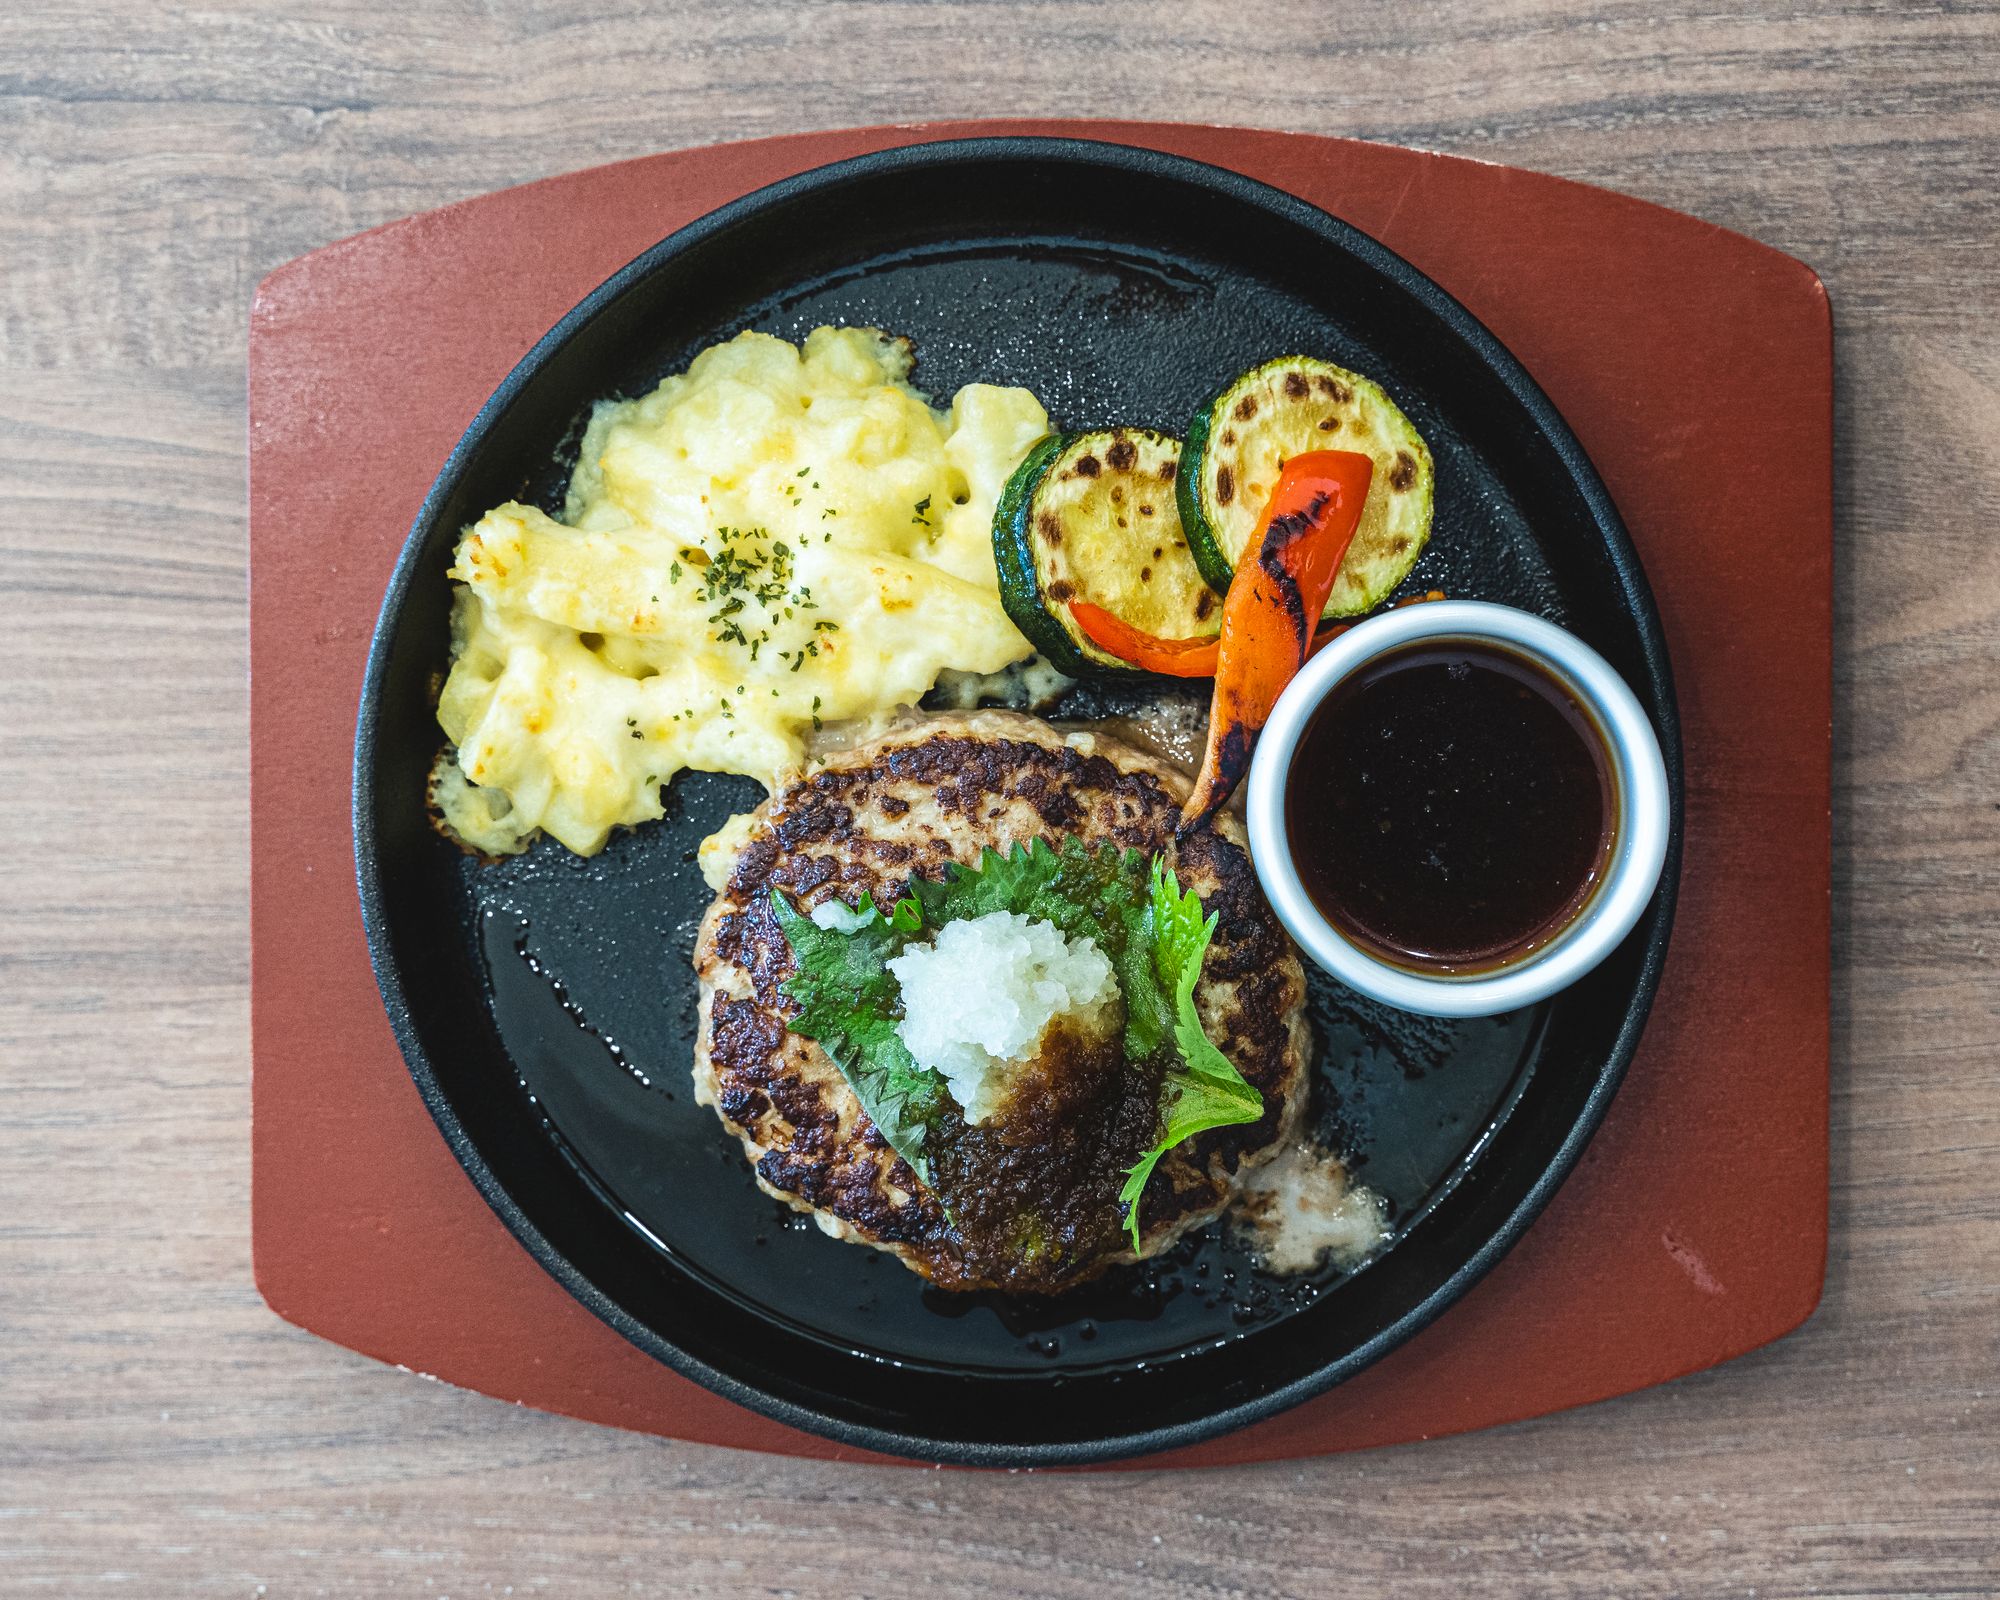 Japanese hamburg steak with potato gratin and roasted vegetables, sitting ontop of a sizzling metal pan